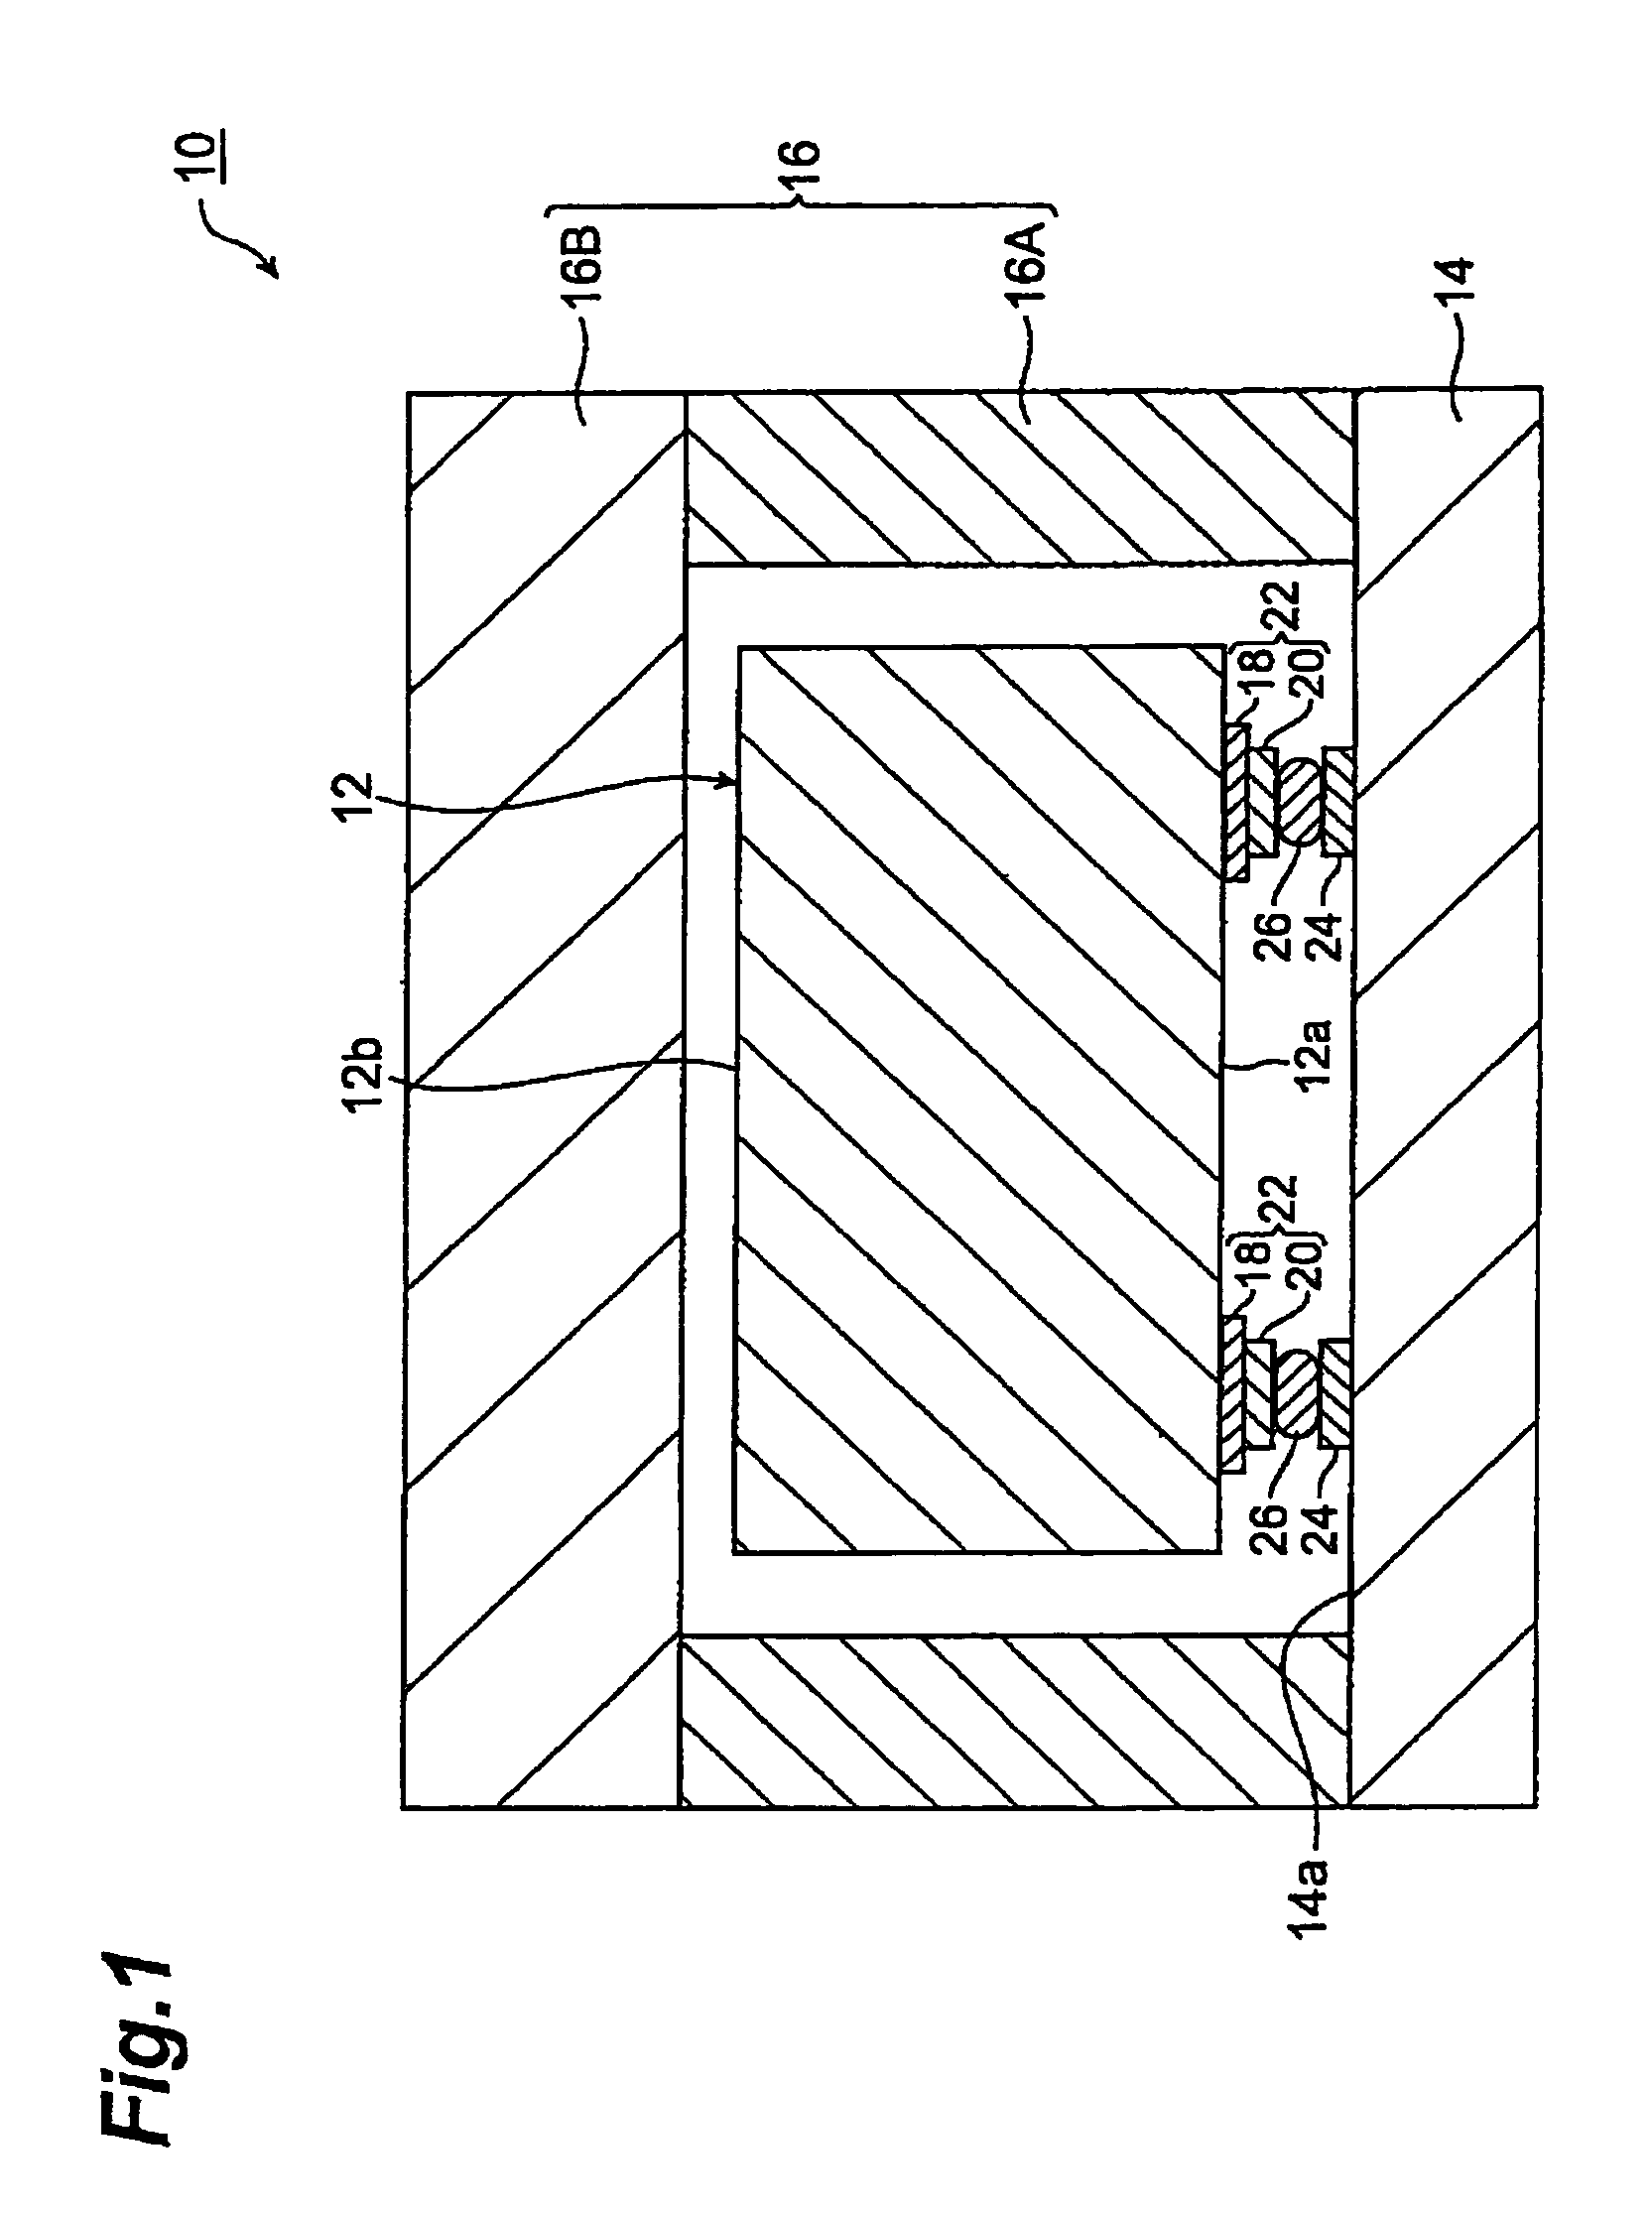 Surface acoustic wave element, surface acoustic wave device, duplexer, and method of making surface acoustic wave element